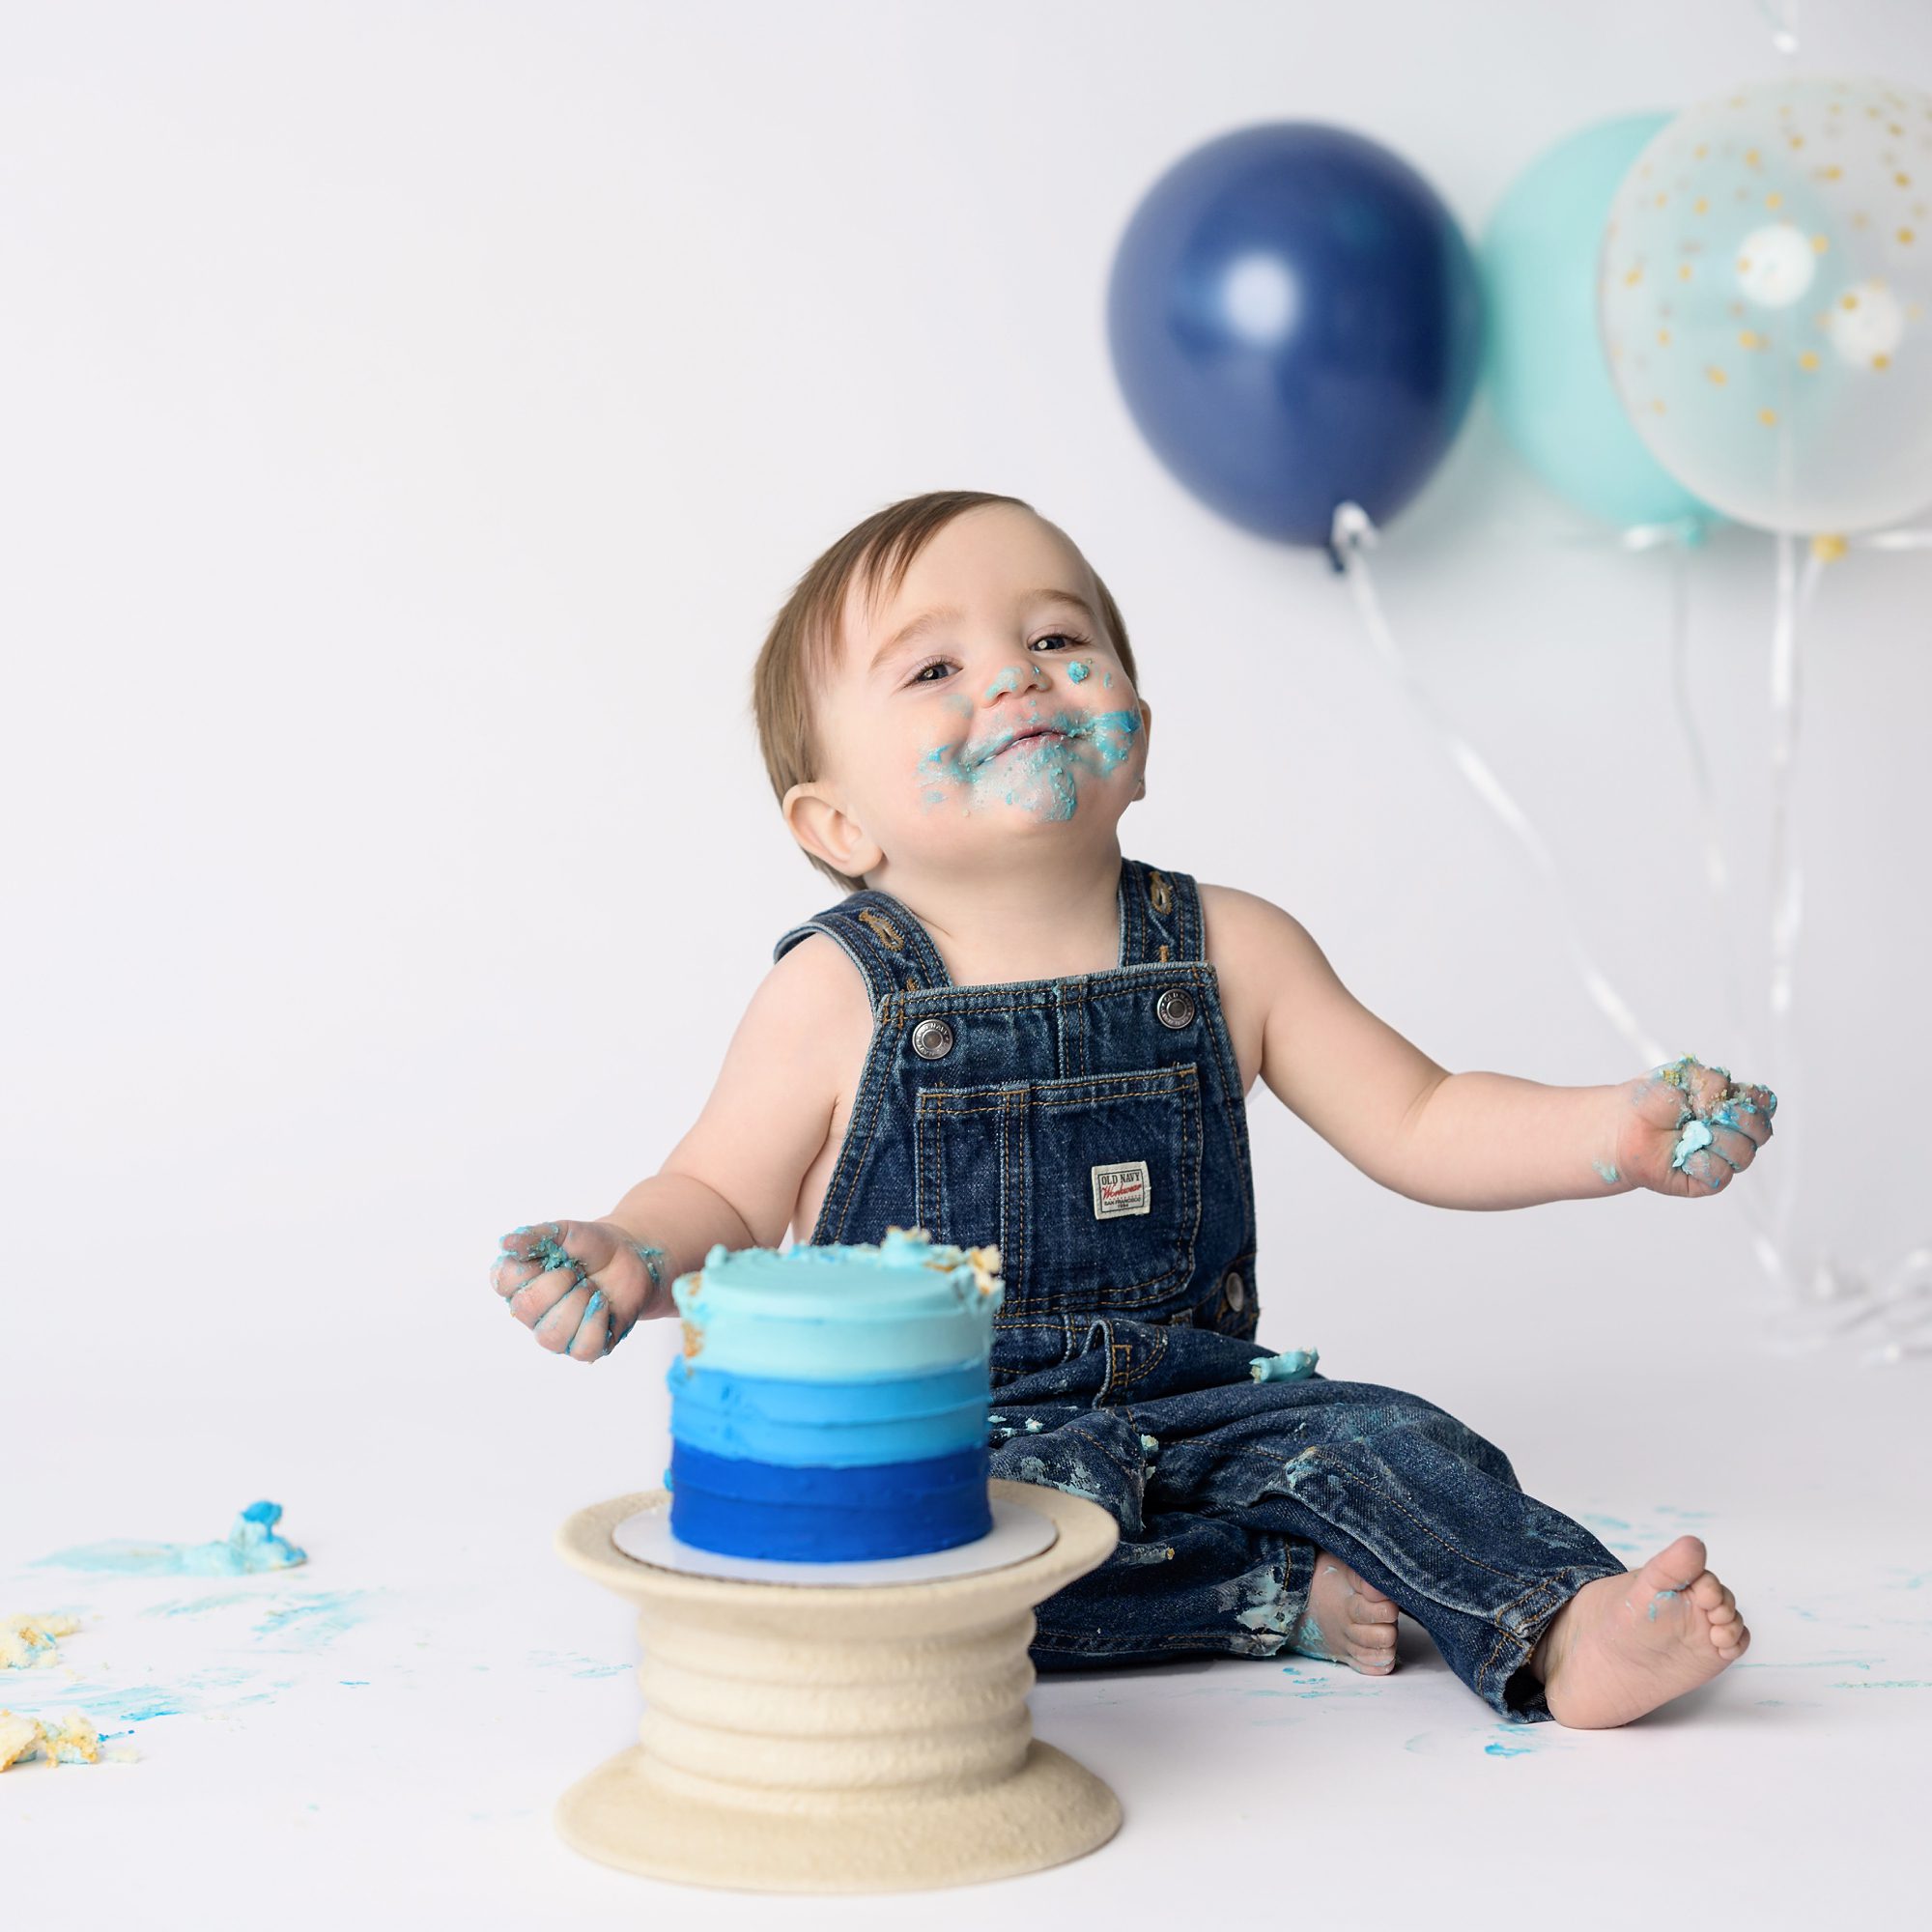 Baby boy cake smash session at the Faces You Love Photography Overland Park studio. Cake is shades of blue, with balloons in the background to match. Baby has blue frosting on his face.